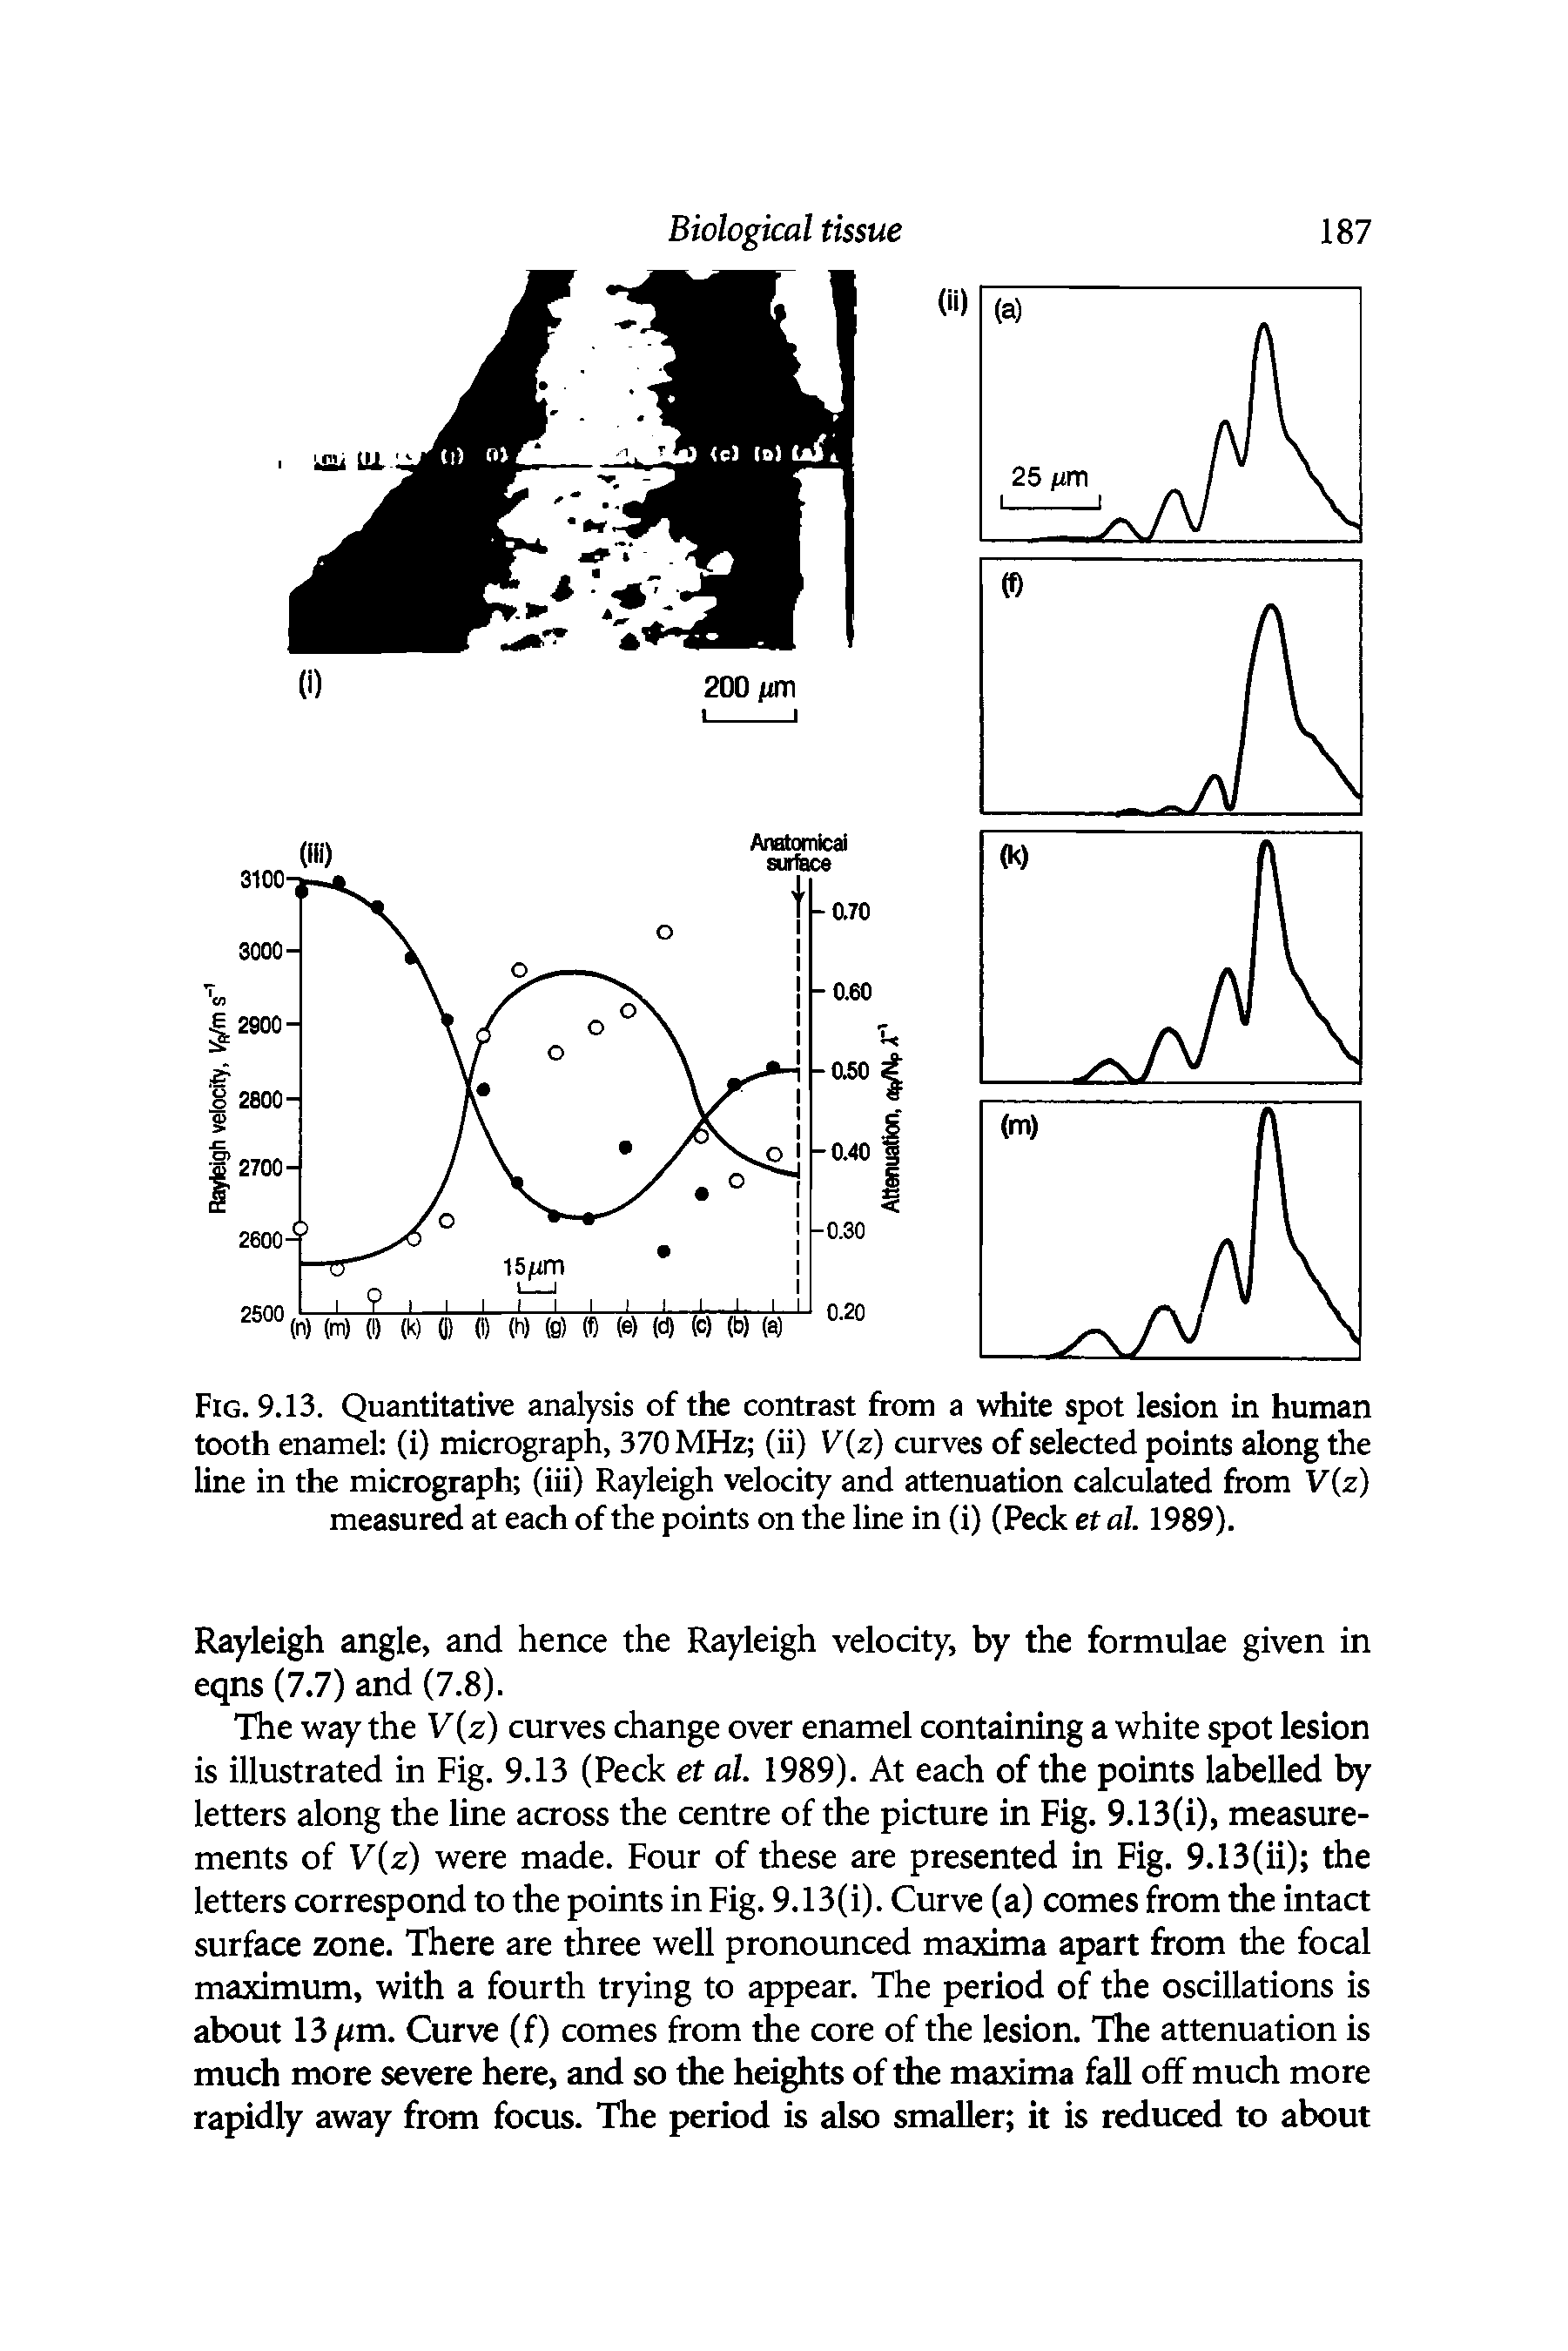 Fig. 9.13. Quantitative analysis of the contrast from a white spot lesion in human tooth enamel (i) micrograph, 370 MHz (ii) V(z) curves of selected points along the line in the micrograph (iii) Rayleigh velocity and attenuation calculated from V(z) measured at each of the points on the line in (i) (Peck et al. 1989).